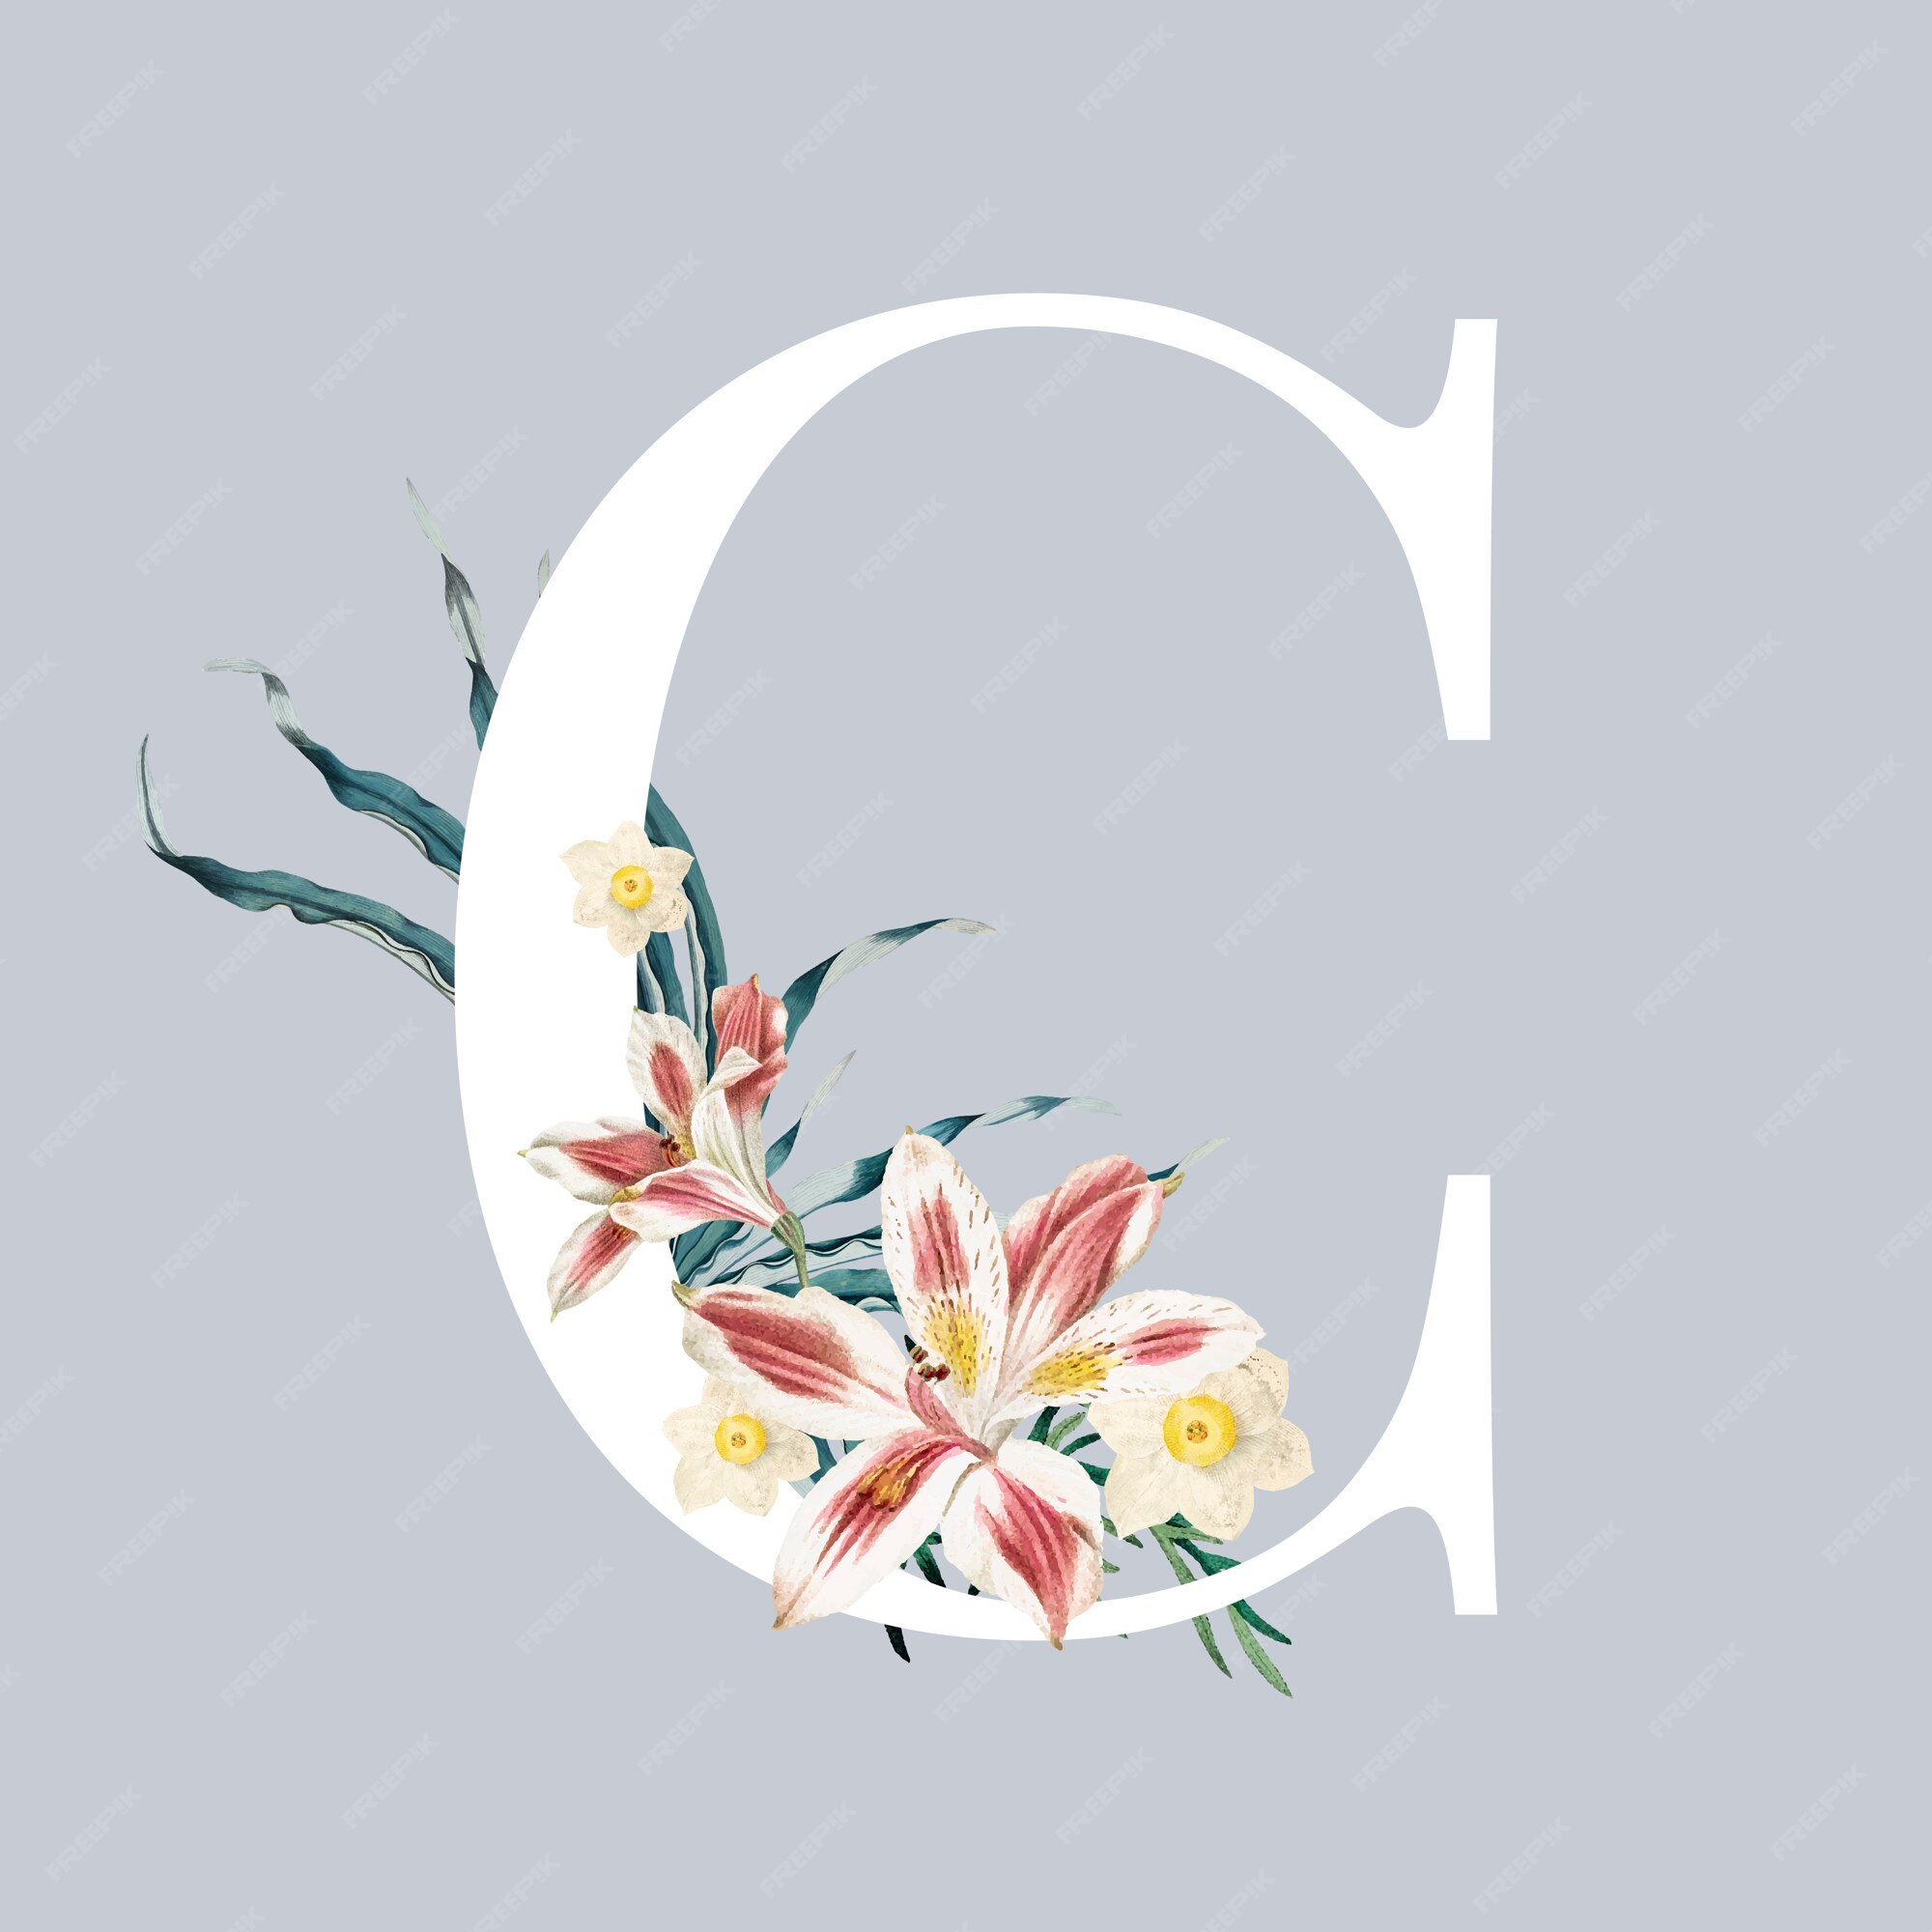 Free Vector | Letter c with blossoms